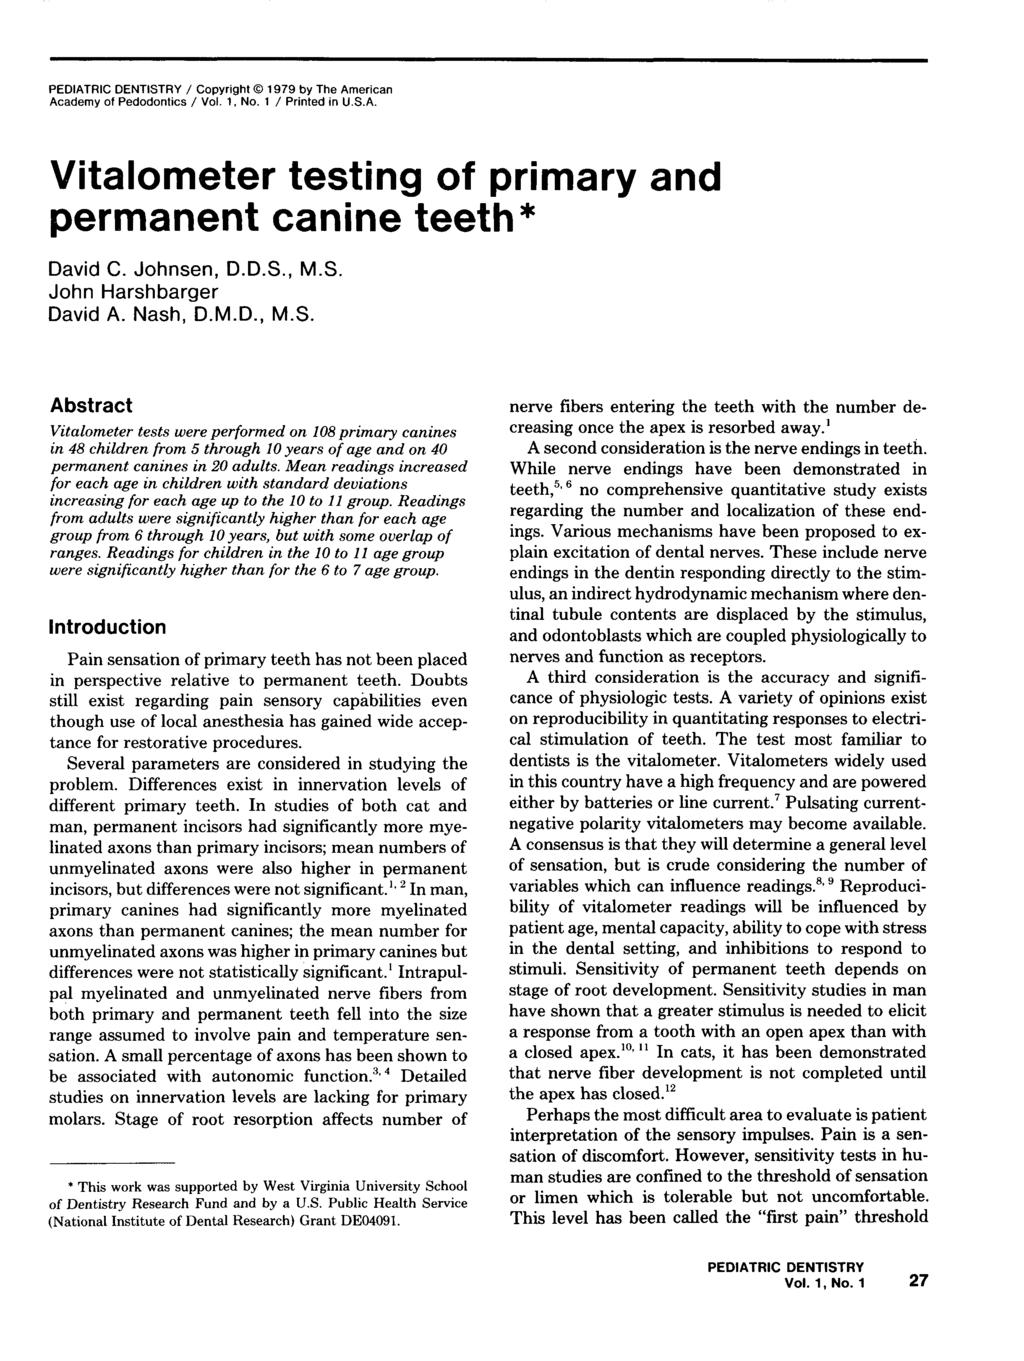 / Copyright 1979 by The American Academy of Pedodontics / Vol. 1. No. 1 / Printed in U.S.A. Vitalometer testing of primary and permanent canine teeth* David C. Johnsen, D.D.S., M.S. John Harshbarger David A.